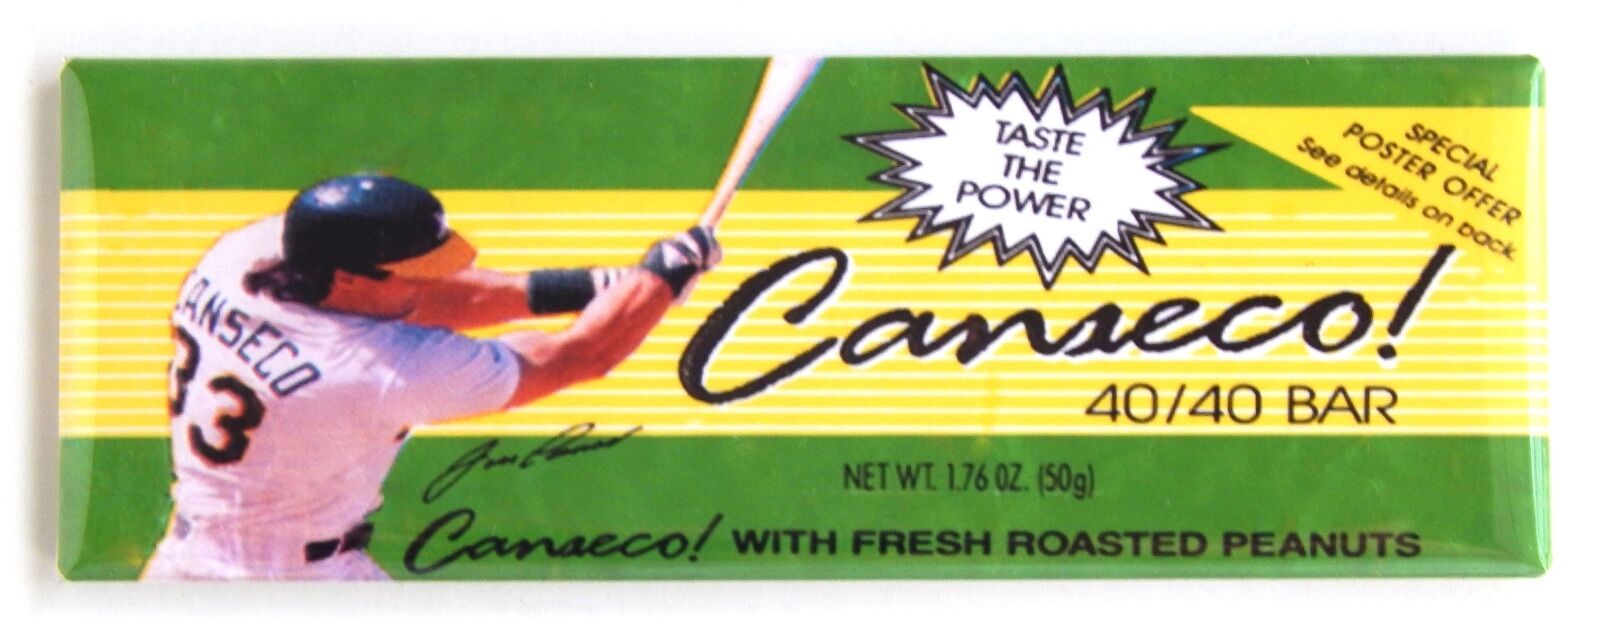 Jose Canseco Candy Bar FRIDGE MAGNET (1.5 x 4.5 inches) sign oakland athletics